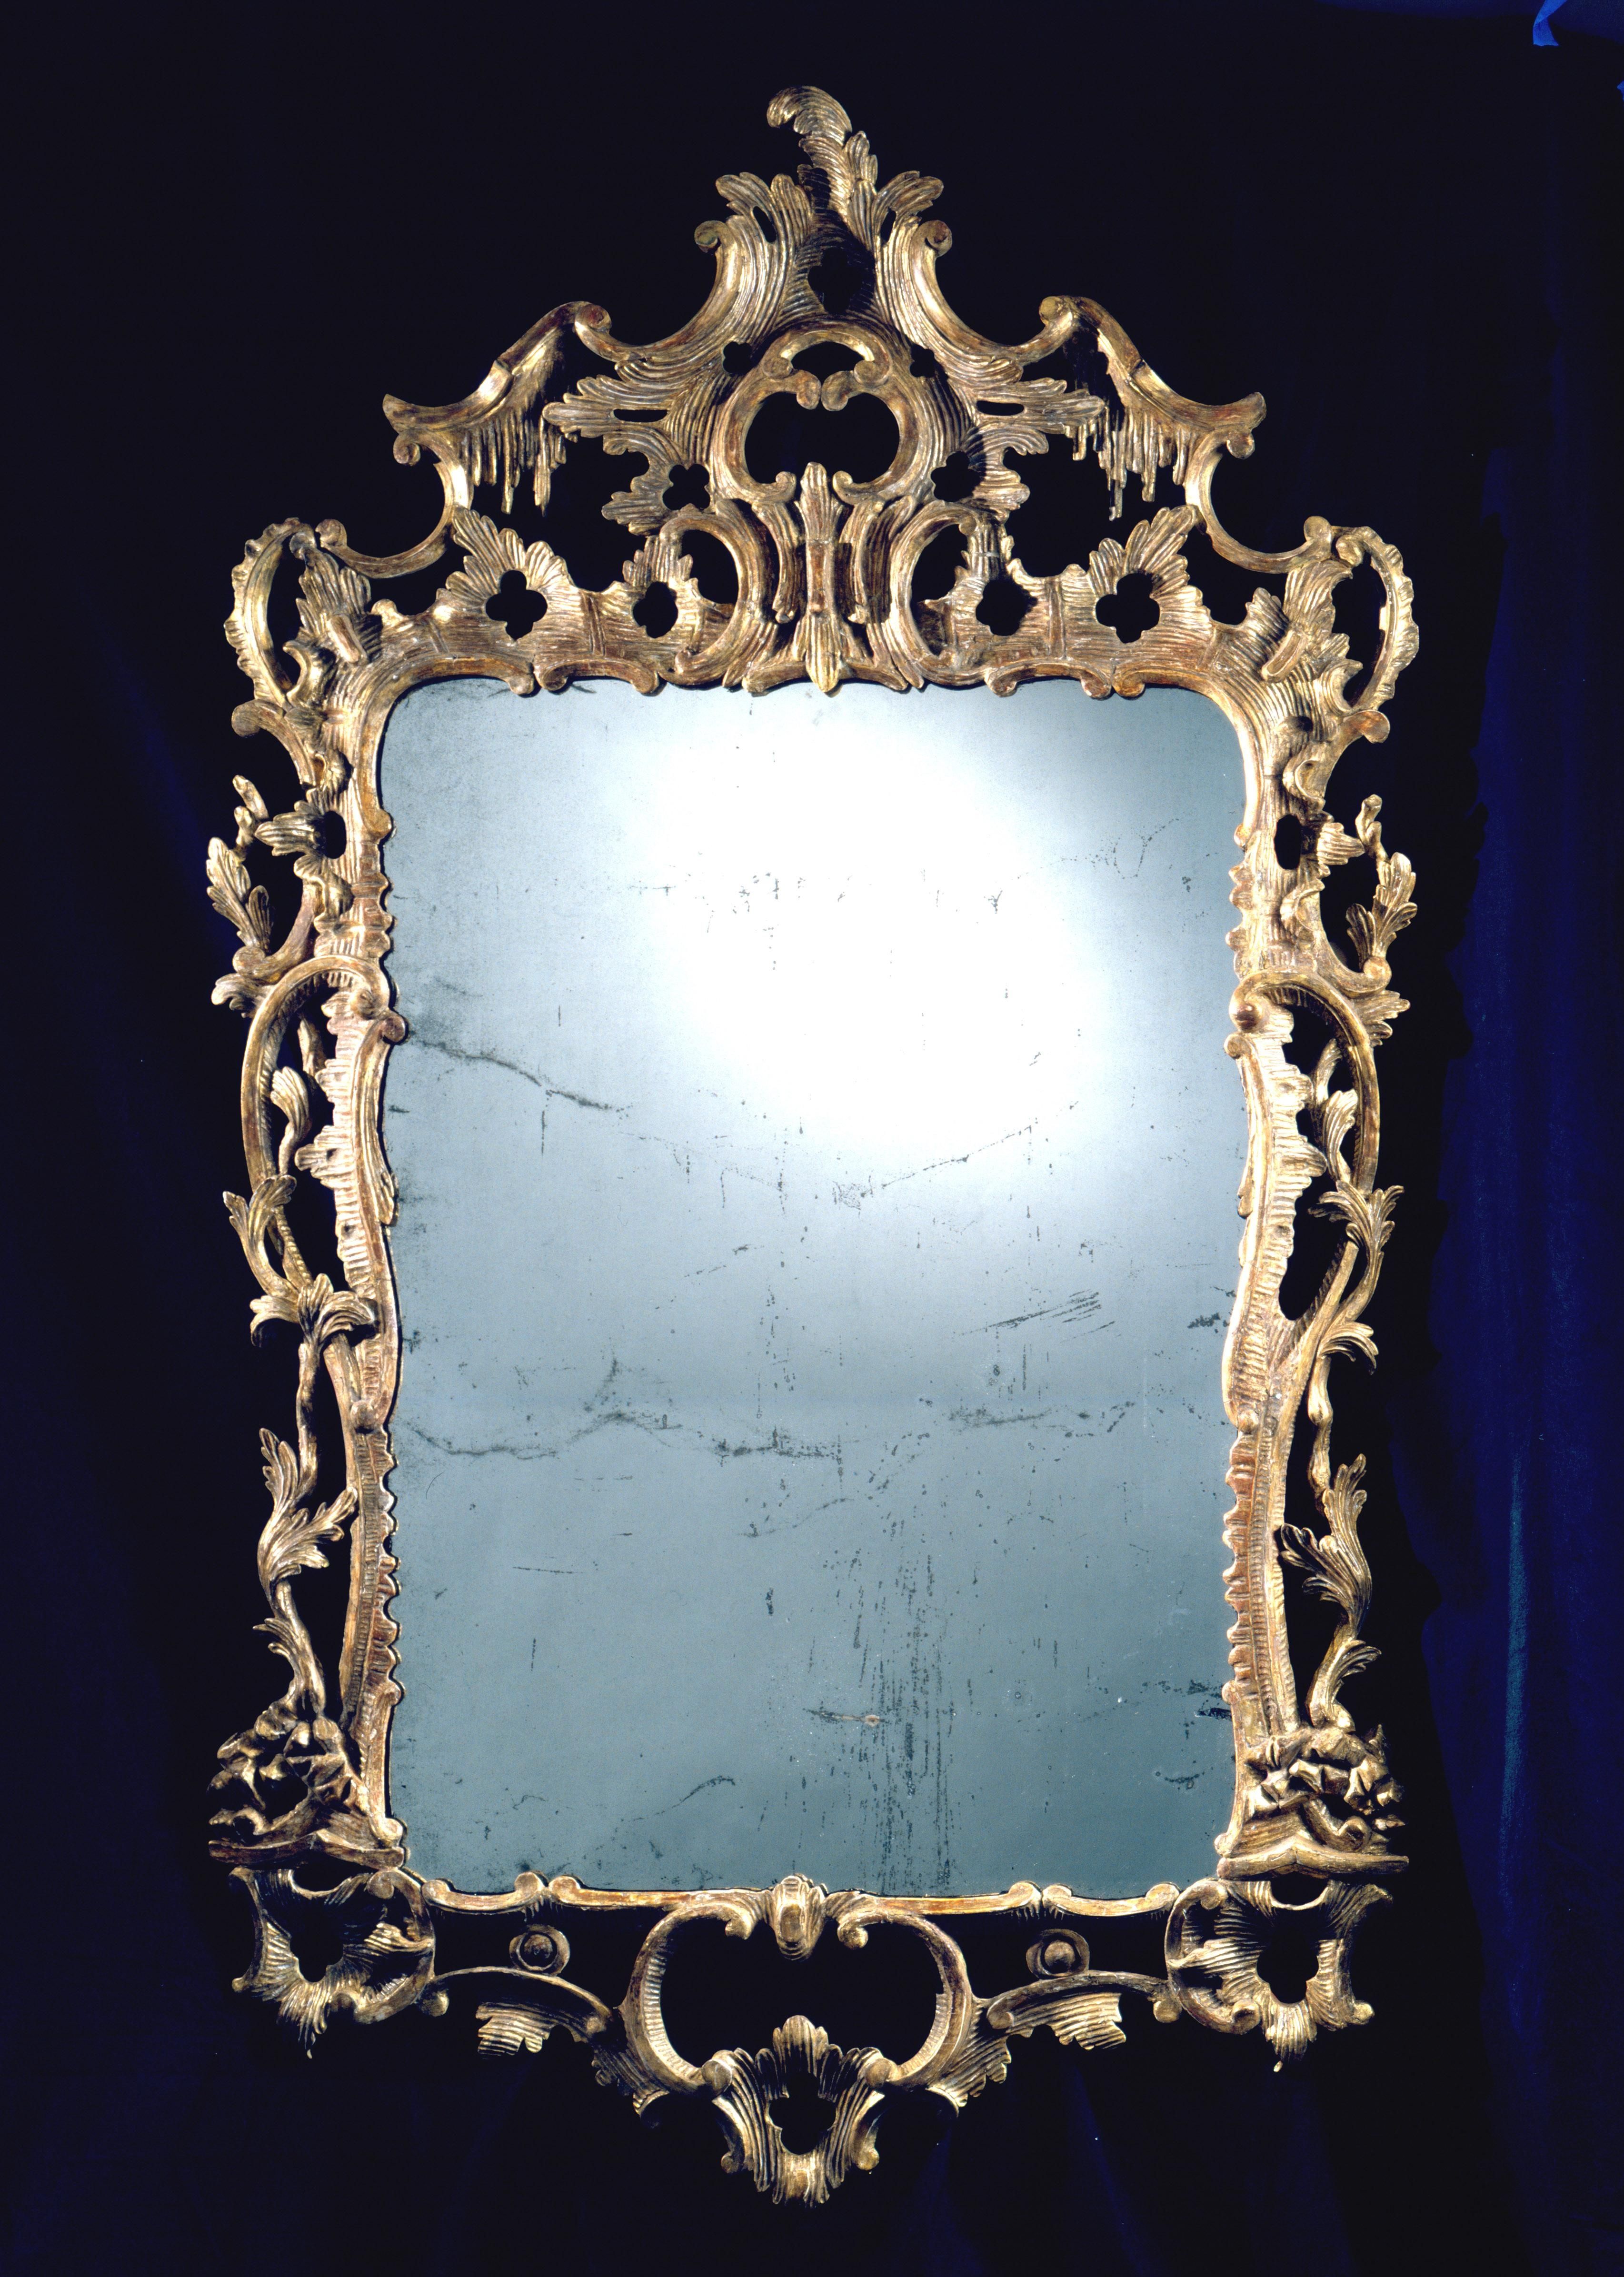 Large Rococo Look Glass | Clinton Howell Pertaining To Large Rococo Mirror (View 18 of 20)